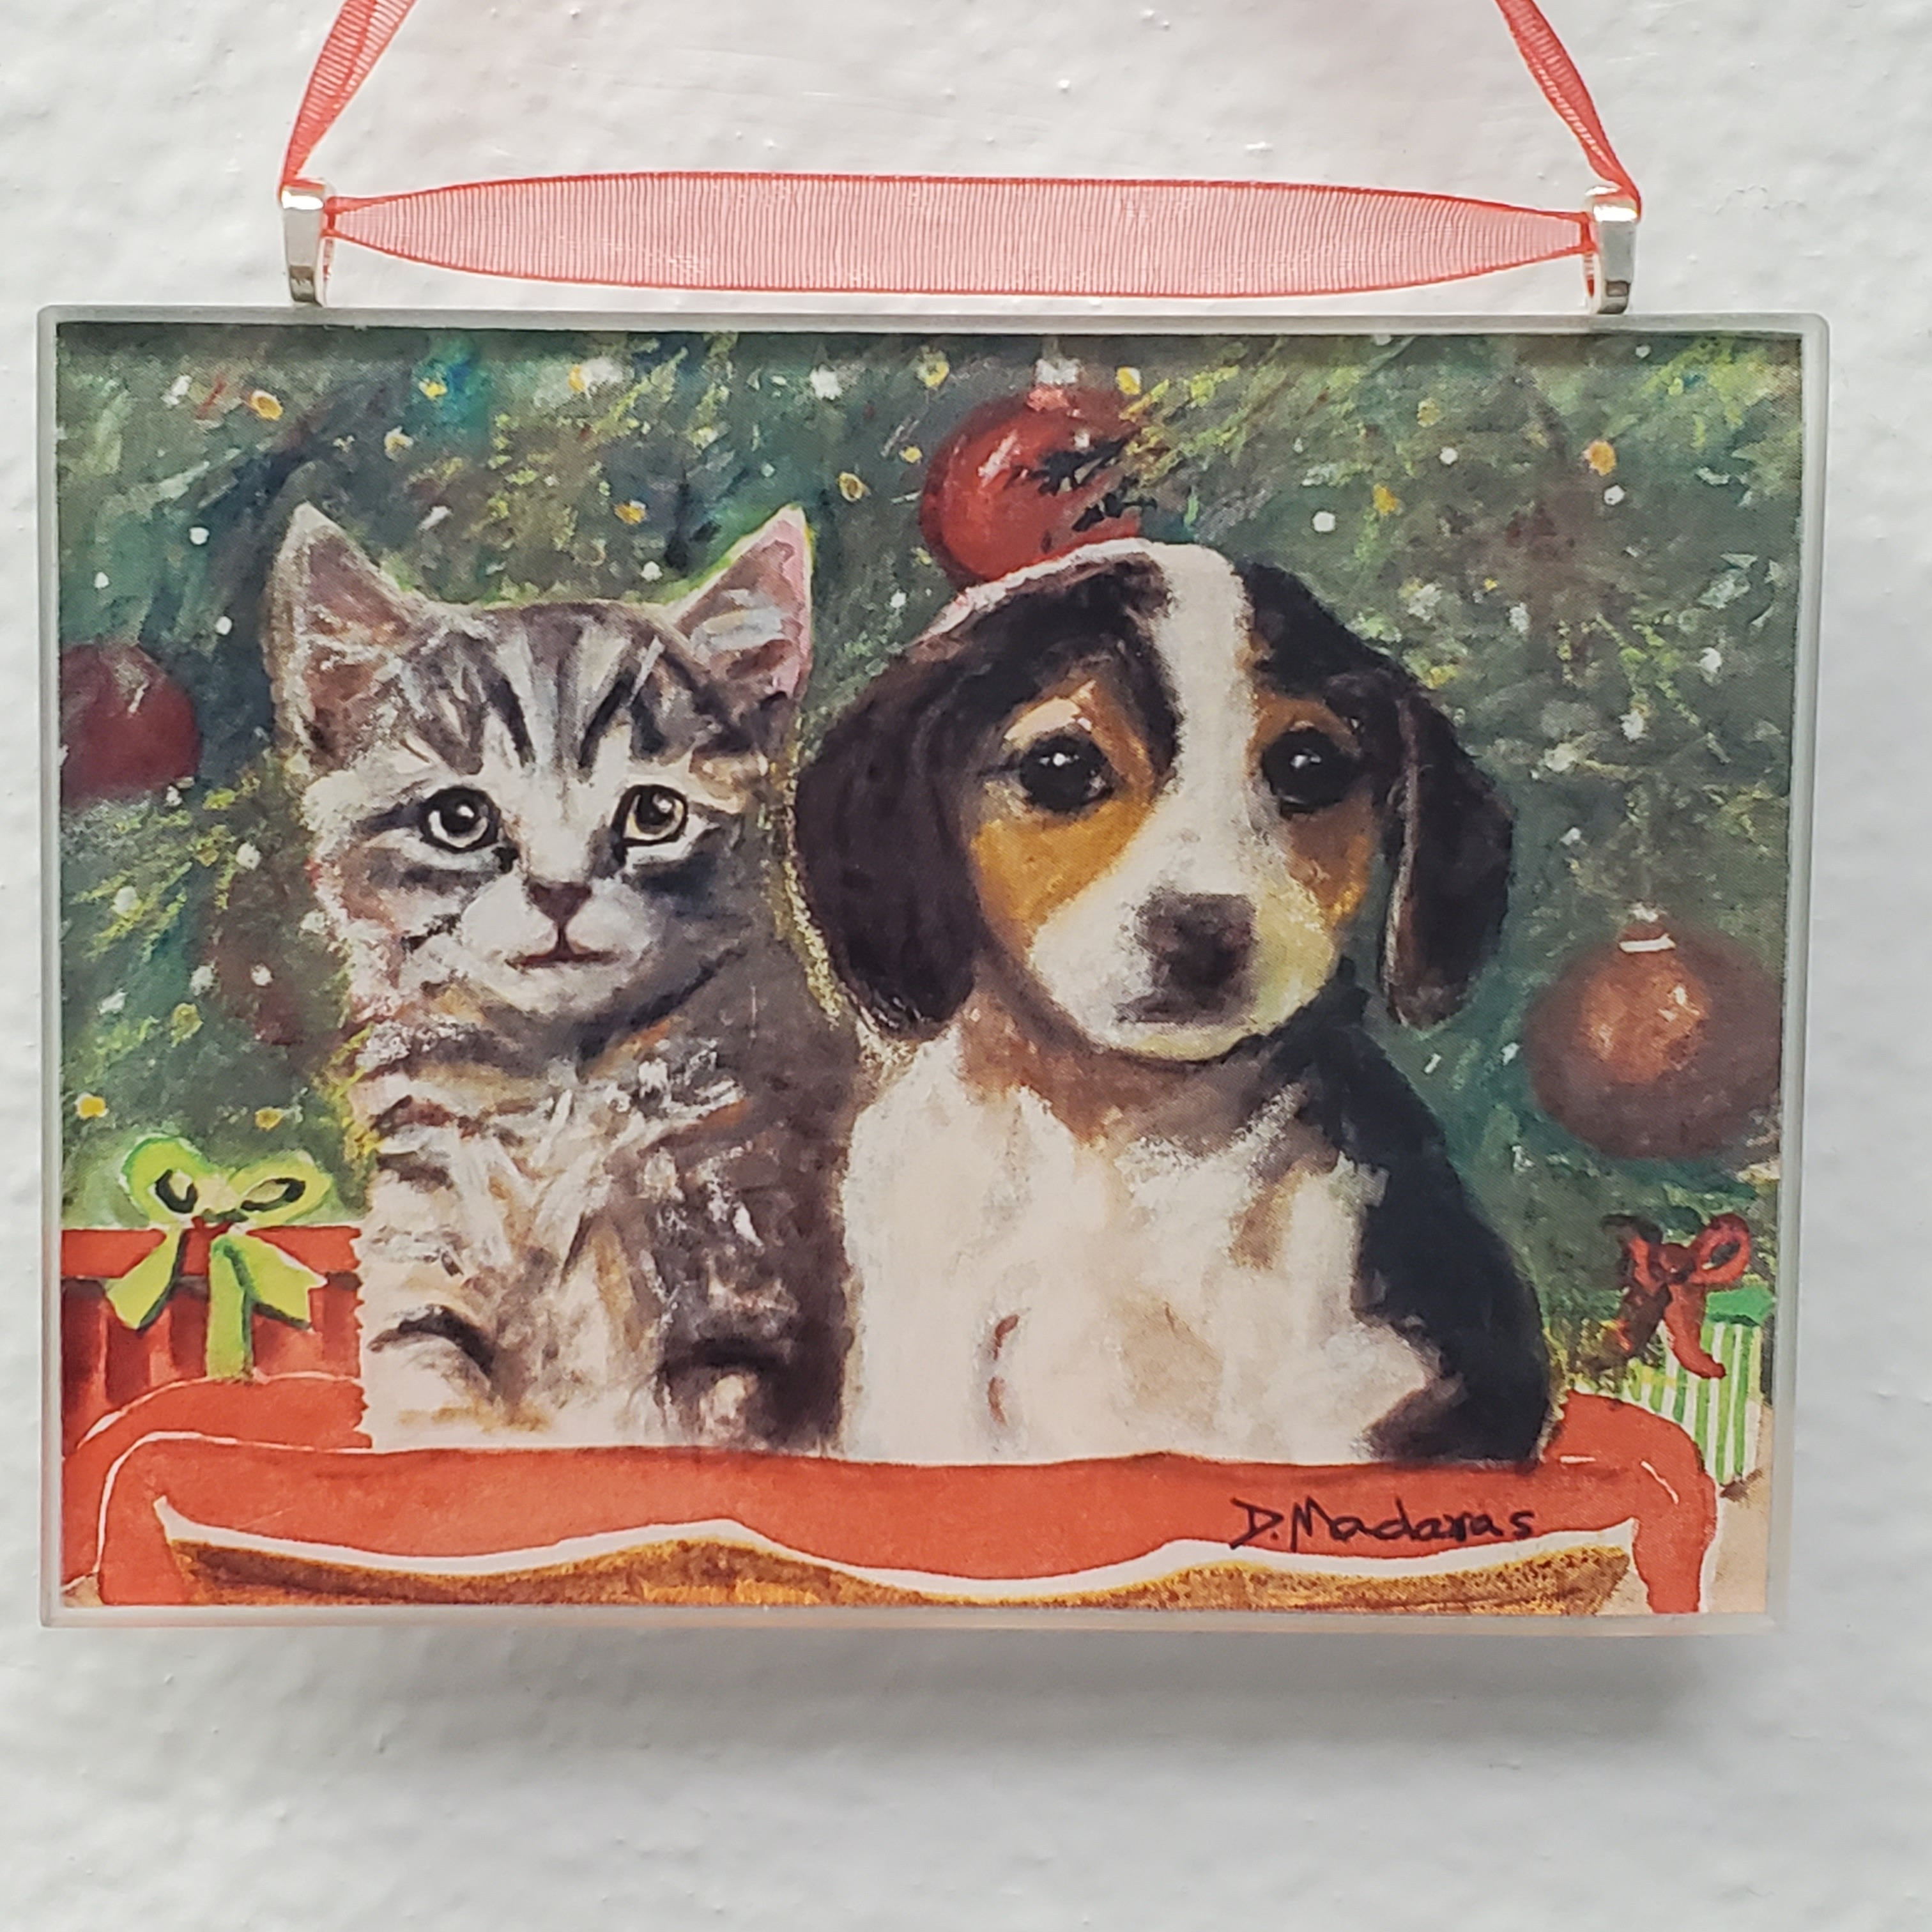 Glass Ornament #4 from Madaras Gallery in Tucson, AZ - Kitten and Puppy sitting in front of Christmas Tree - 3" x 4"